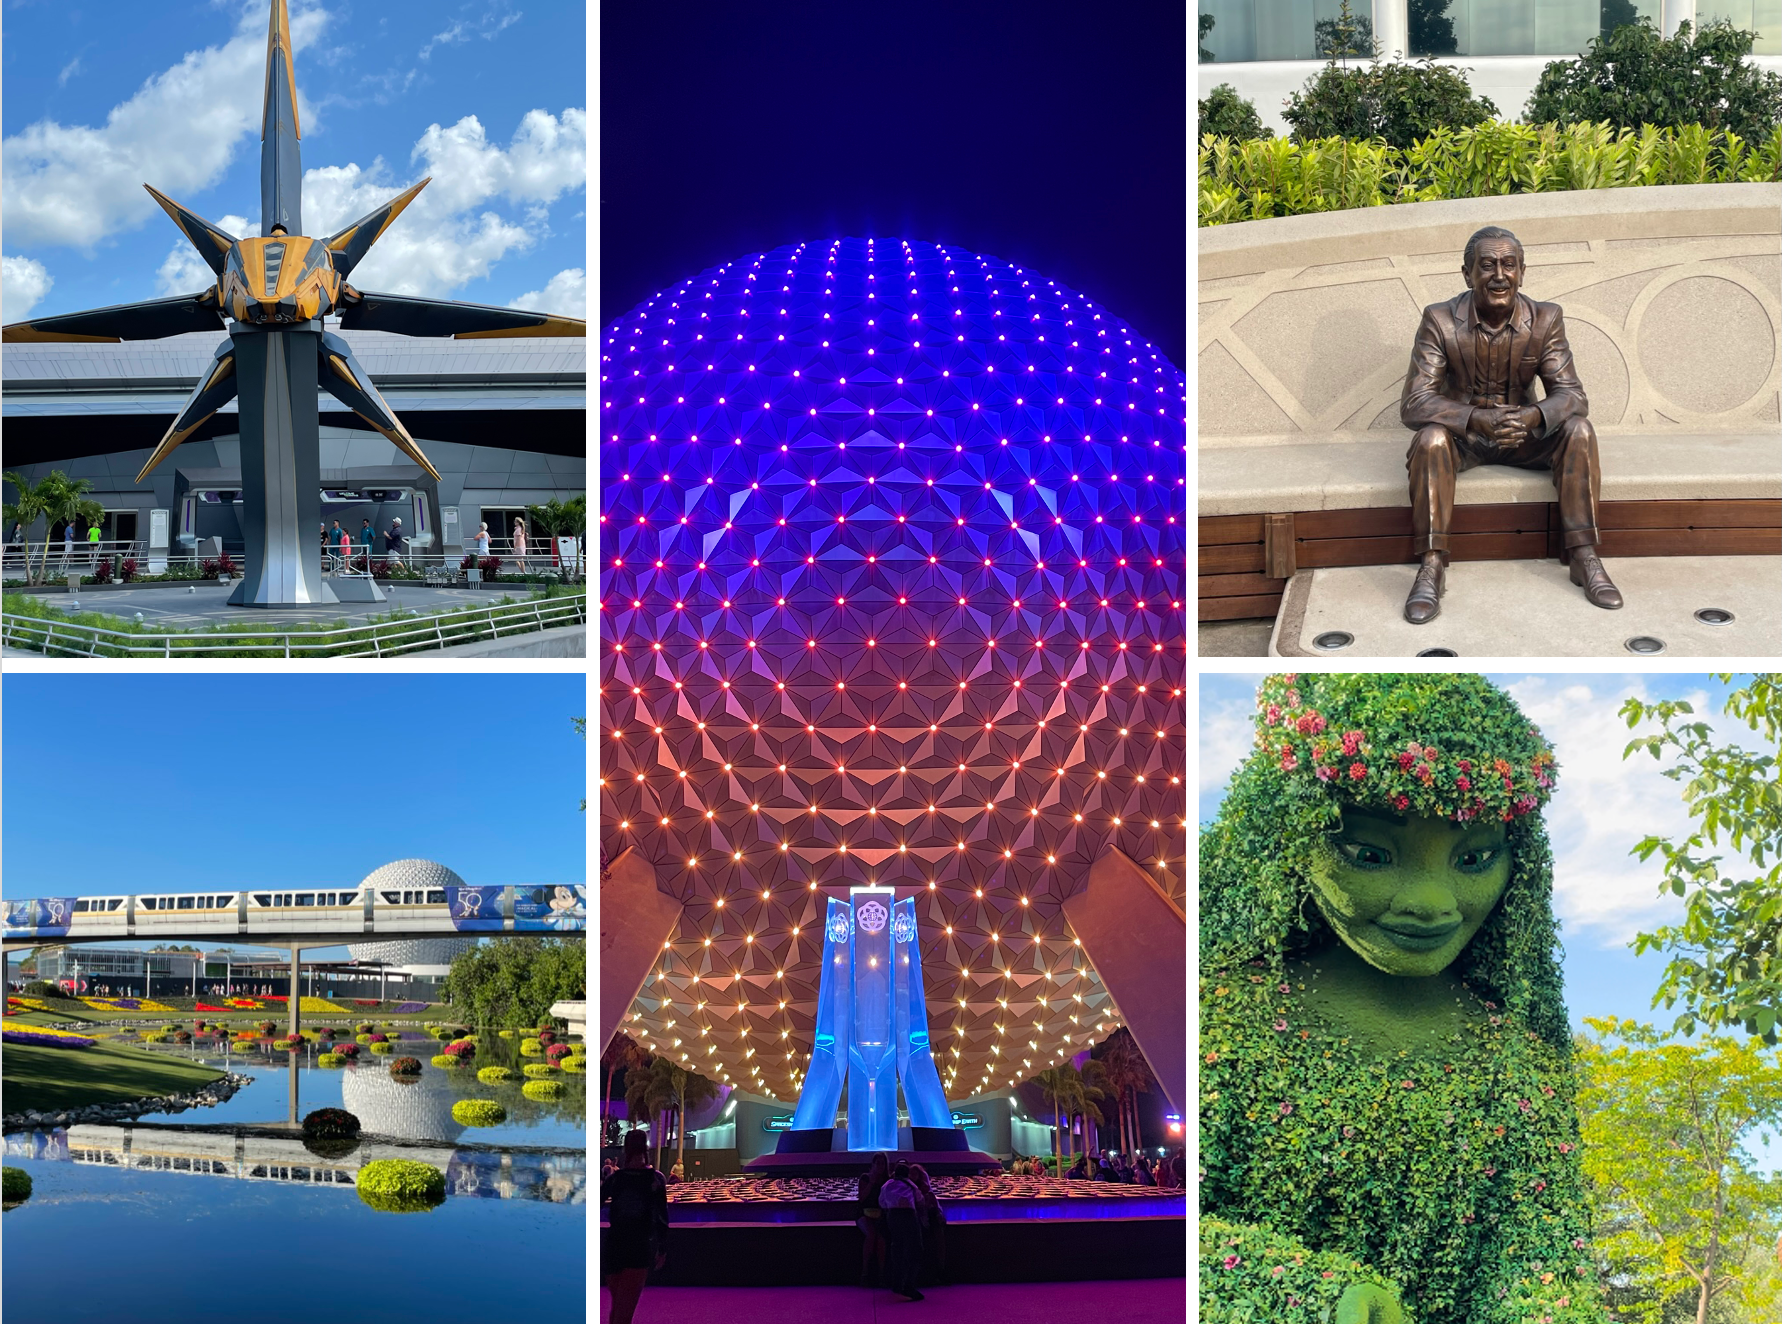 Is Today’s Epcot the Best Epcot Ever?